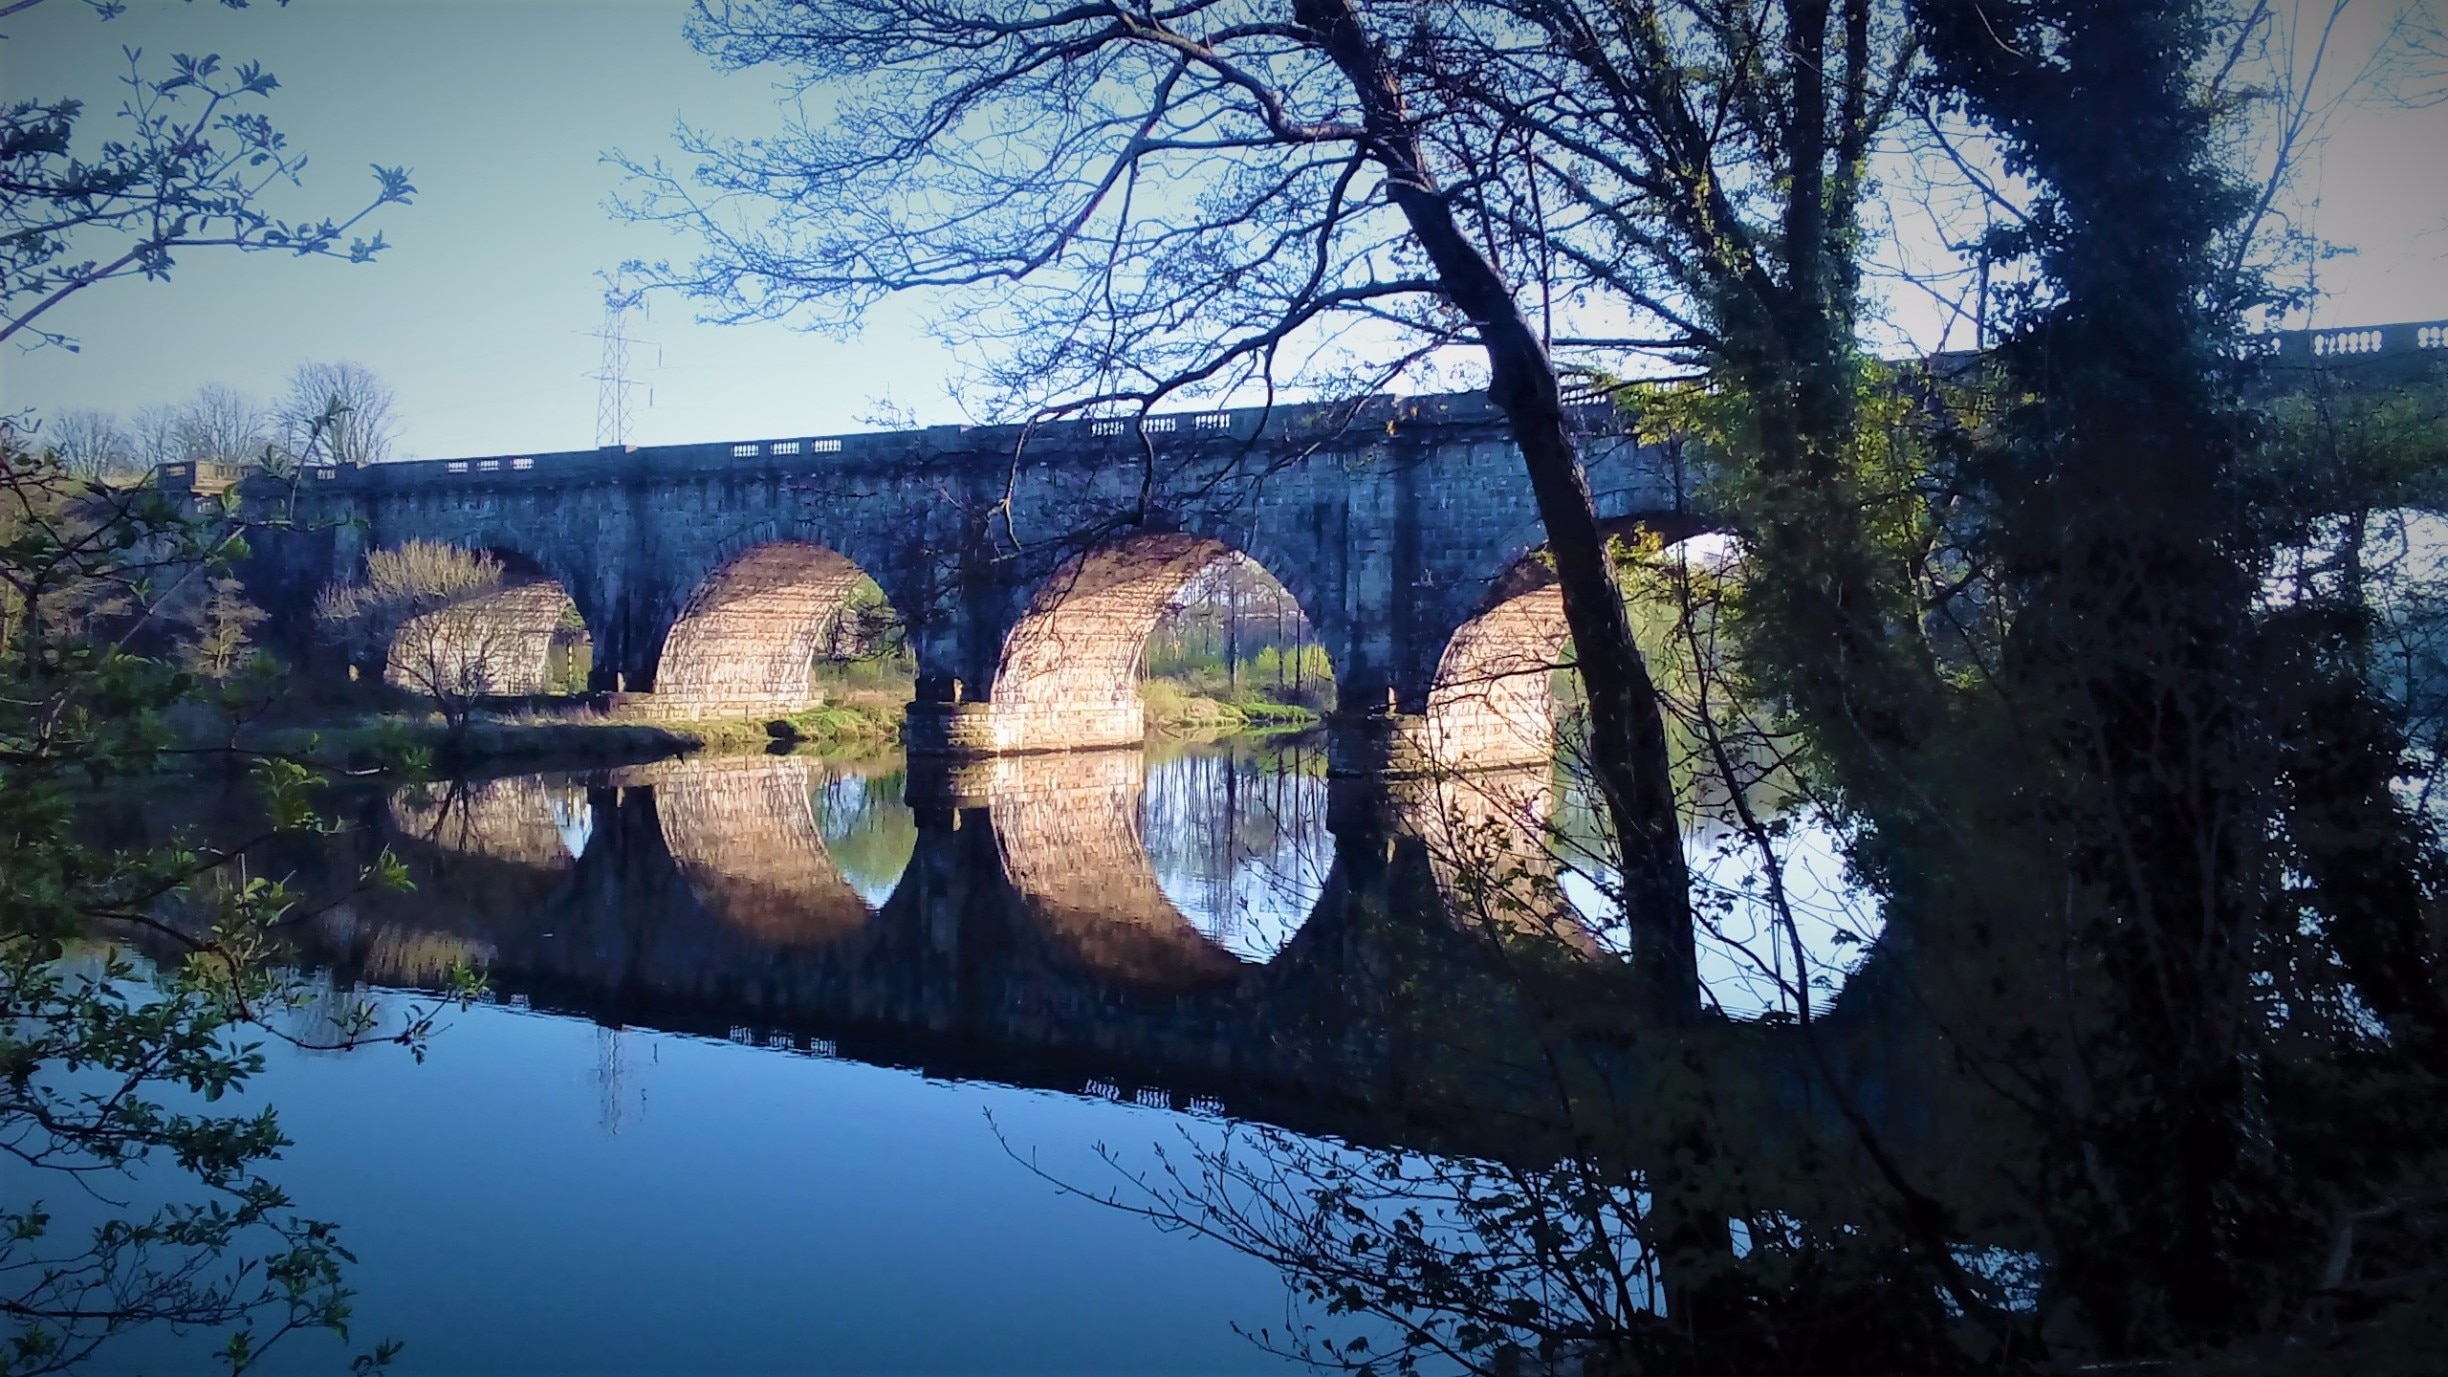 Very pretty Aquaduct carrying the Lancaster section of the Canal over the River Lune.
#troveon #lifeatexpedia 
#stunningstructures #waterlust
#Architecture #Blue #Reflections #BVSBlue
#mybackyard